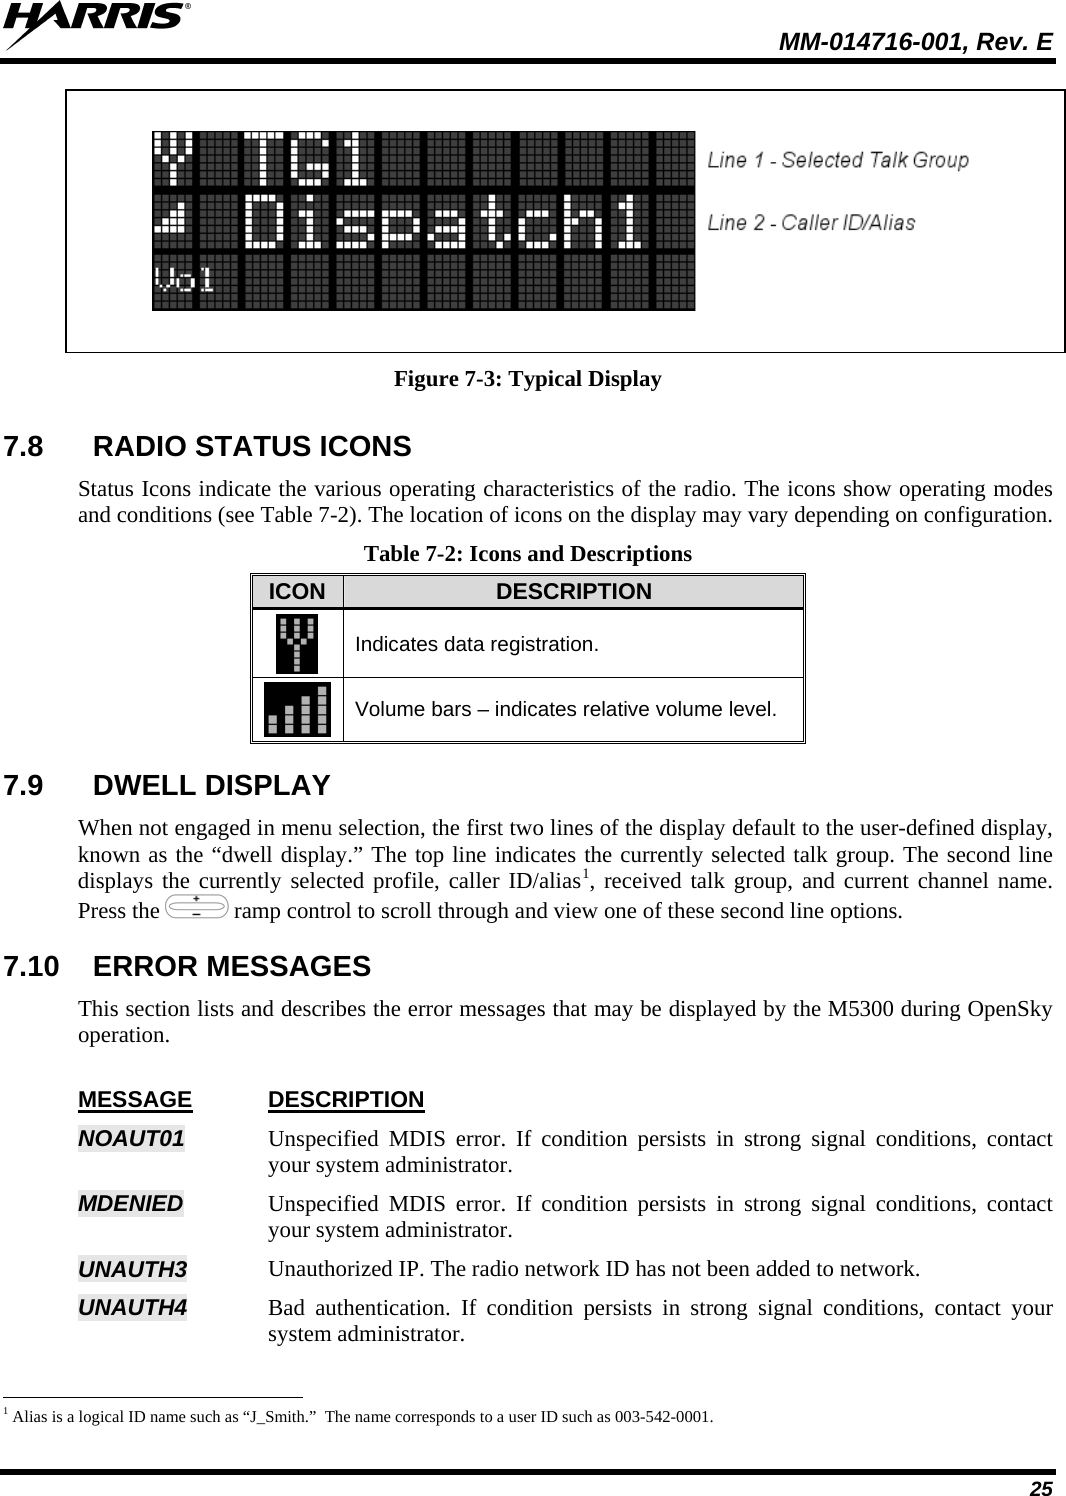  MM-014716-001, Rev. E 25    Figure 7-3: Typical Display 7.8  RADIO STATUS ICONS Status Icons indicate the various operating characteristics of the radio. The icons show operating modes and conditions (see Table 7-2). The location of icons on the display may vary depending on configuration. Table 7-2: Icons and Descriptions ICON  DESCRIPTION  Indicates data registration.  Volume bars – indicates relative volume level. 7.9  DWELL DISPLAY When not engaged in menu selection, the first two lines of the display default to the user-defined display, known as the “dwell display.” The top line indicates the currently selected talk group. The second line displays the currently selected profile, caller ID/alias1, received talk group, and current channel name. Press the   ramp control to scroll through and view one of these second line options.  7.10  ERROR MESSAGES This section lists and describes the error messages that may be displayed by the M5300 during OpenSky operation.  MESSAGE DESCRIPTION NOAUT01  Unspecified MDIS error. If condition persists in strong signal conditions, contact your system administrator. MDENIED   Unspecified MDIS error. If condition persists in strong signal conditions, contact your system administrator. UNAUTH3  Unauthorized IP. The radio network ID has not been added to network. UNAUTH4  Bad authentication. If condition persists in strong signal conditions, contact your system administrator.                                                            1 Alias is a logical ID name such as “J_Smith.”  The name corresponds to a user ID such as 003-542-0001. 